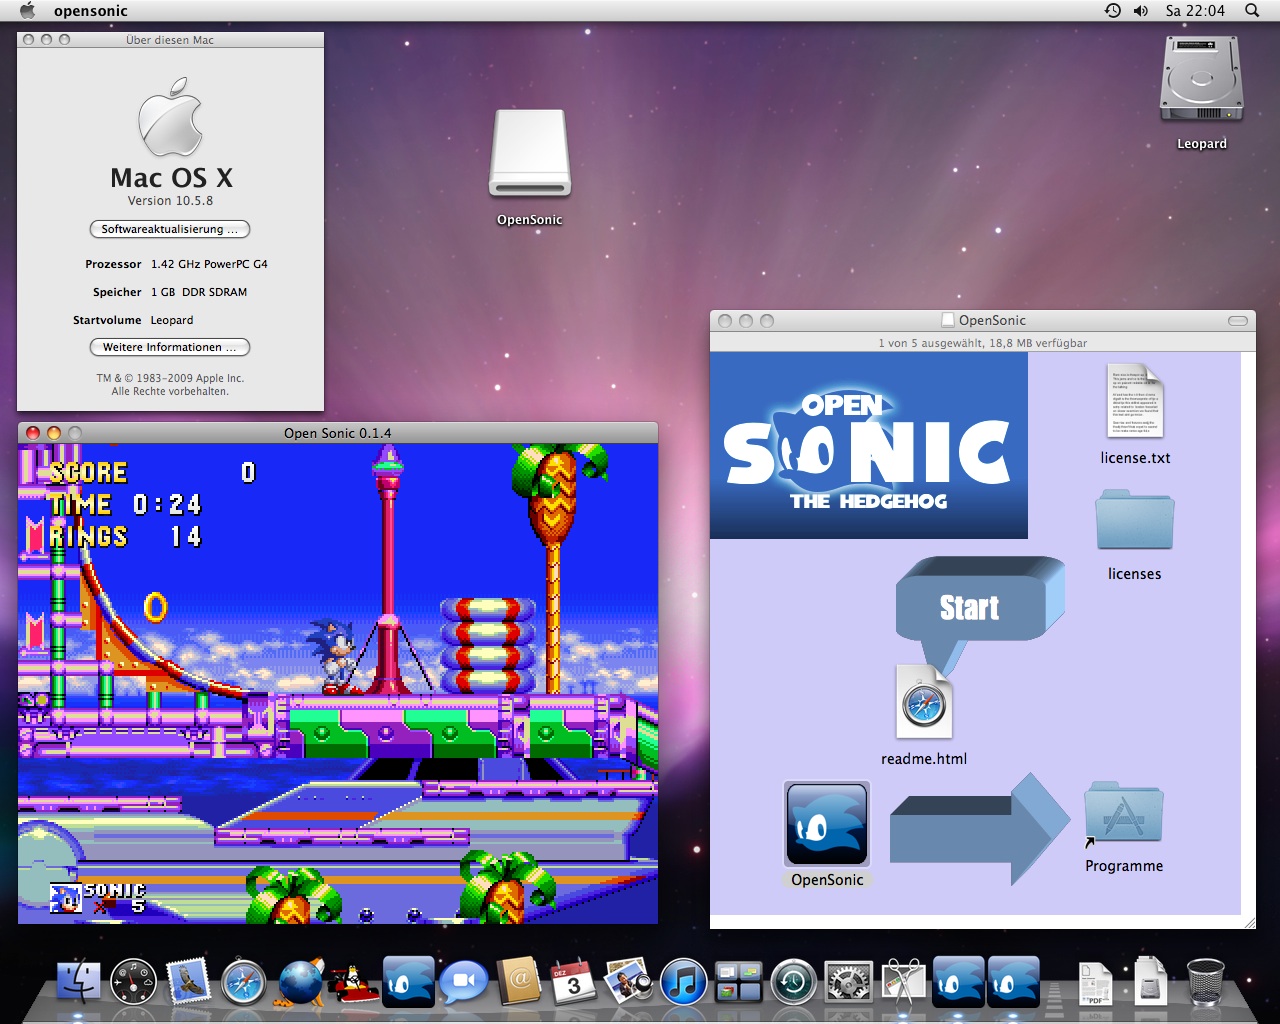 games for mac os x 10.5.8 ppc